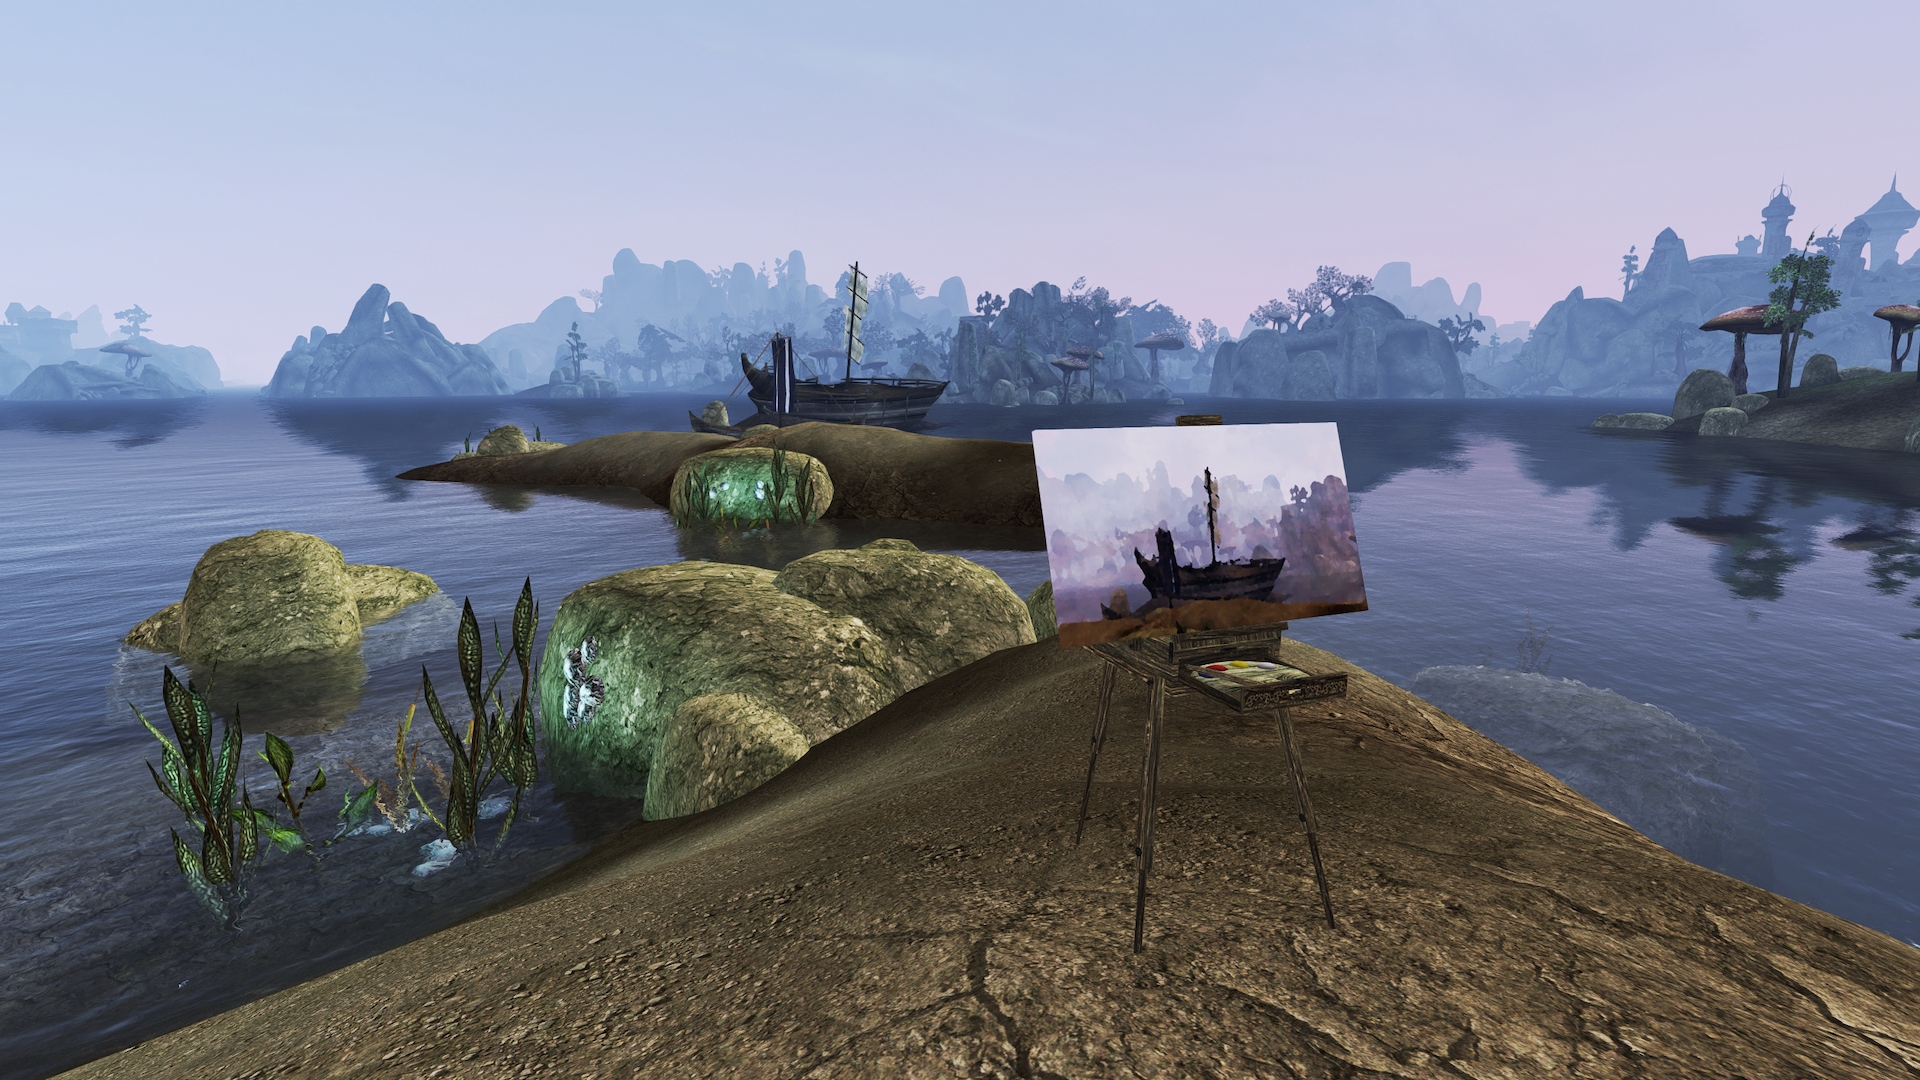 A painting of a boat on a dock sits facing an actual boat in the water of Morrowind